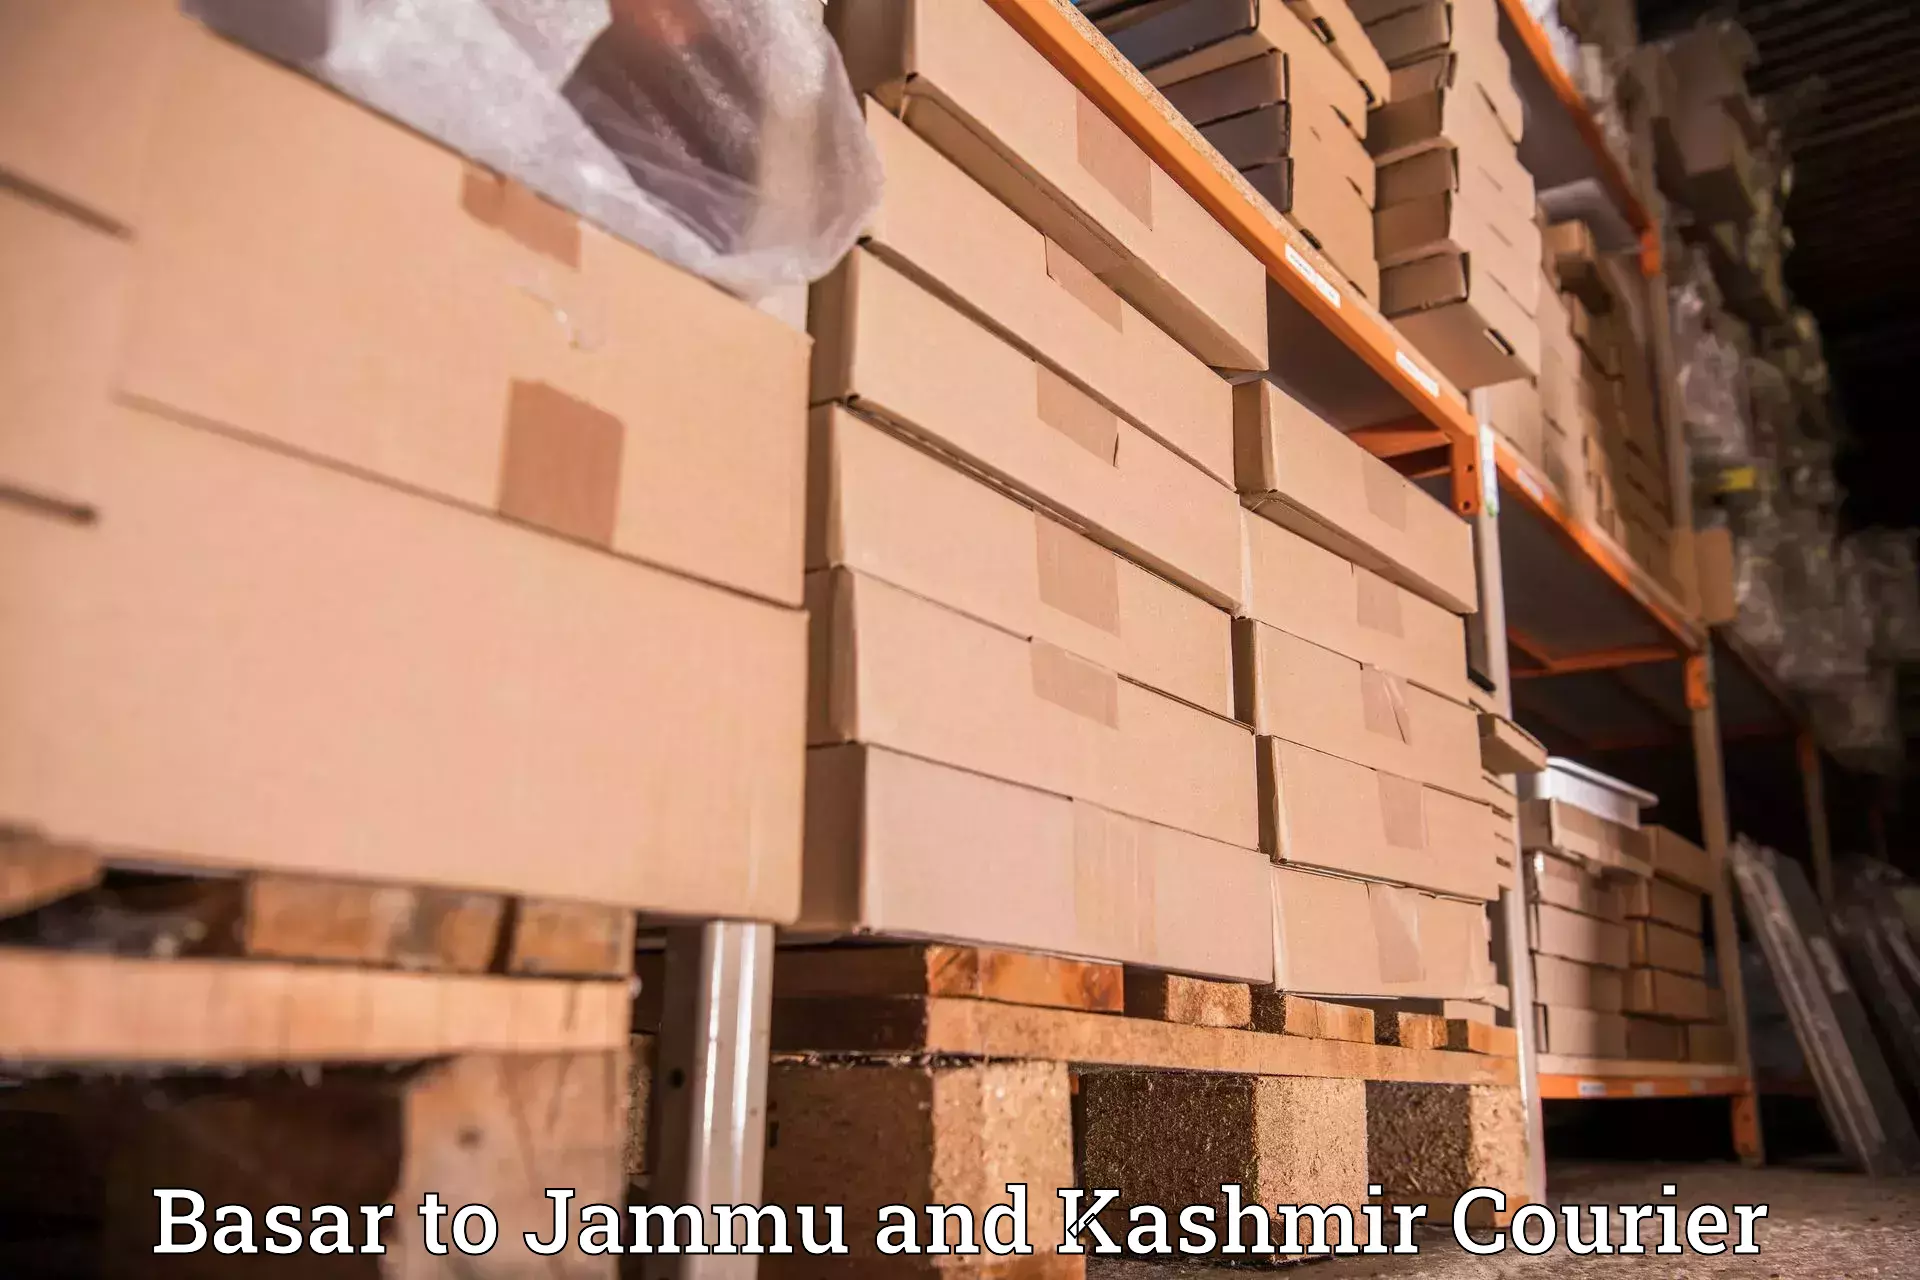 Parcel service for businesses Basar to University of Jammu